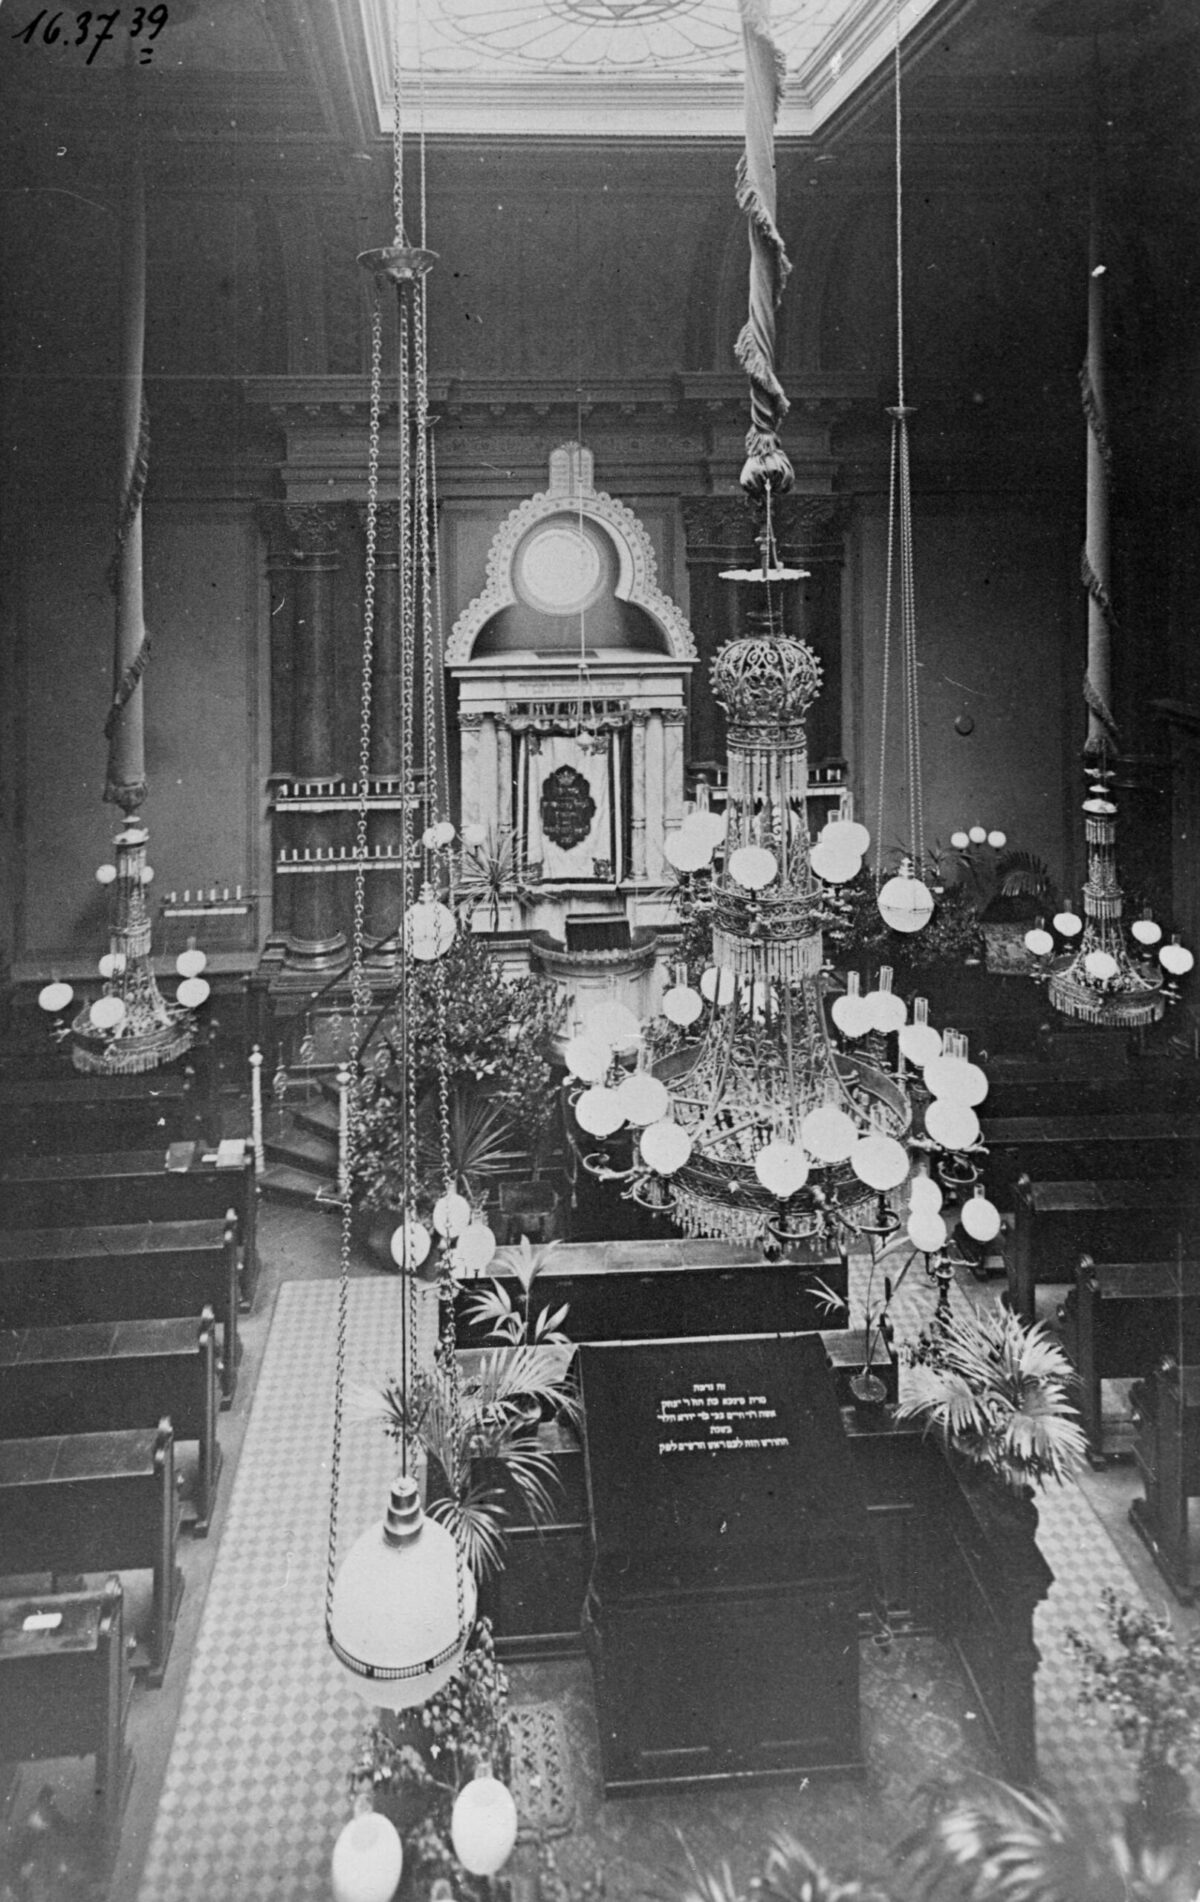 Interior of the synagogue before 1938, probably on Shavuot. HHStAW, fonds 3008, 1, no. 13801